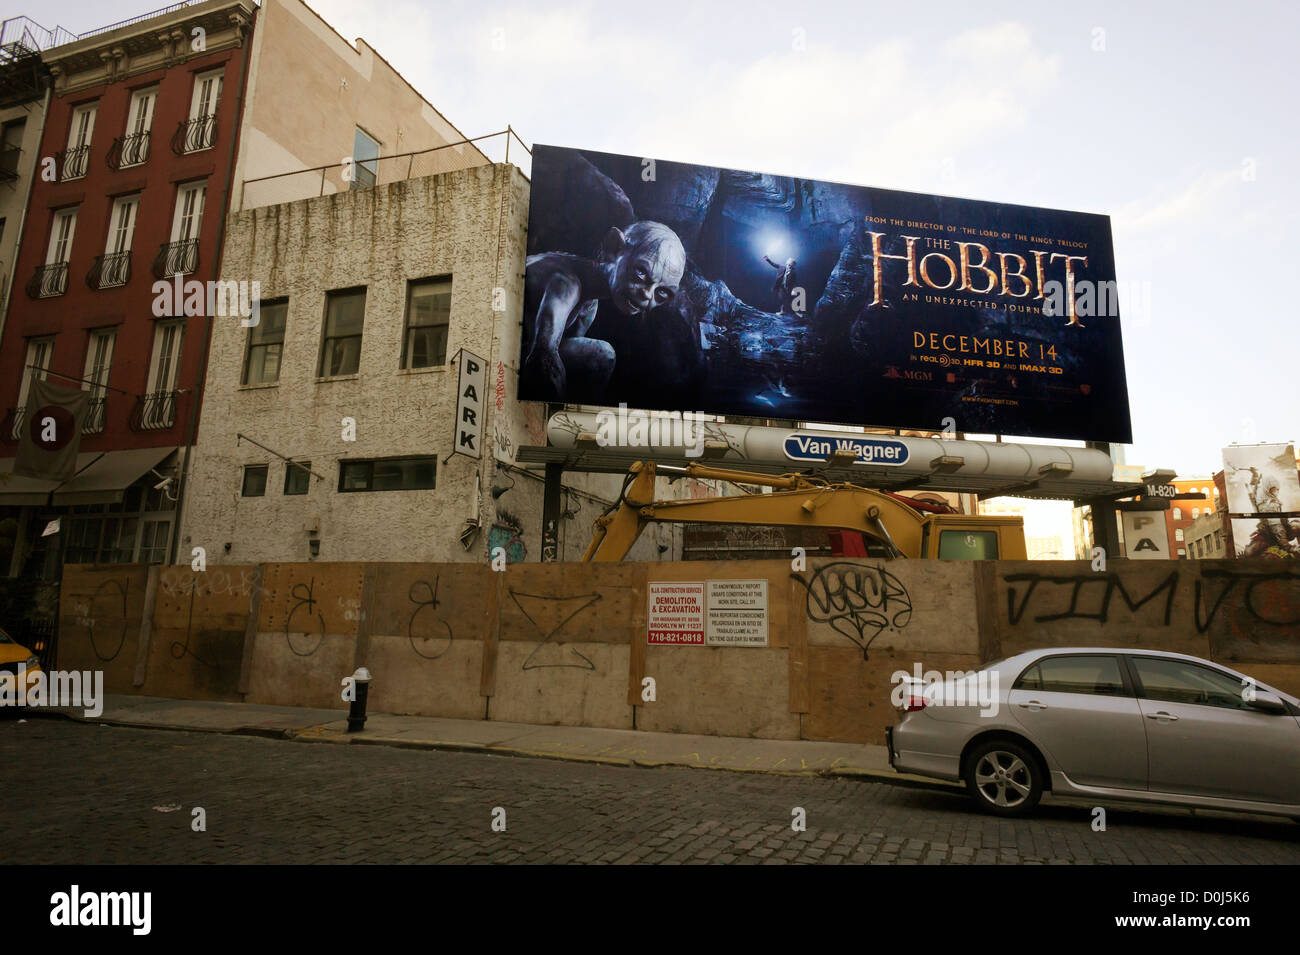 A billboard advertising the 'The Hobbit' movie, is seen in New York Stock Photo